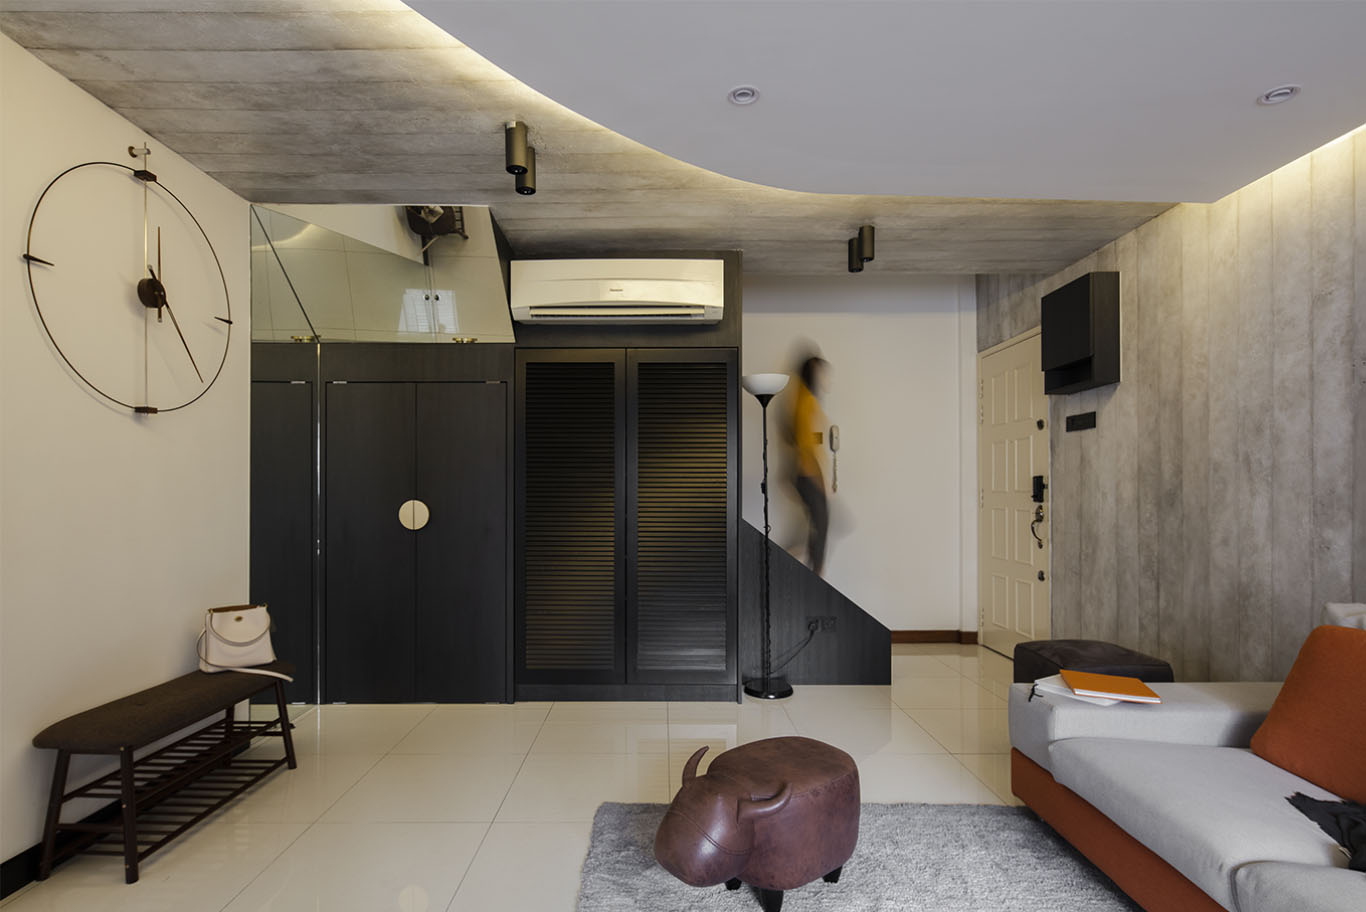 Modern rustic theme interior design with wooden rustic wall and ceiling, with black minimalist cupboard with gold handle, and a hint of orange color of furniture